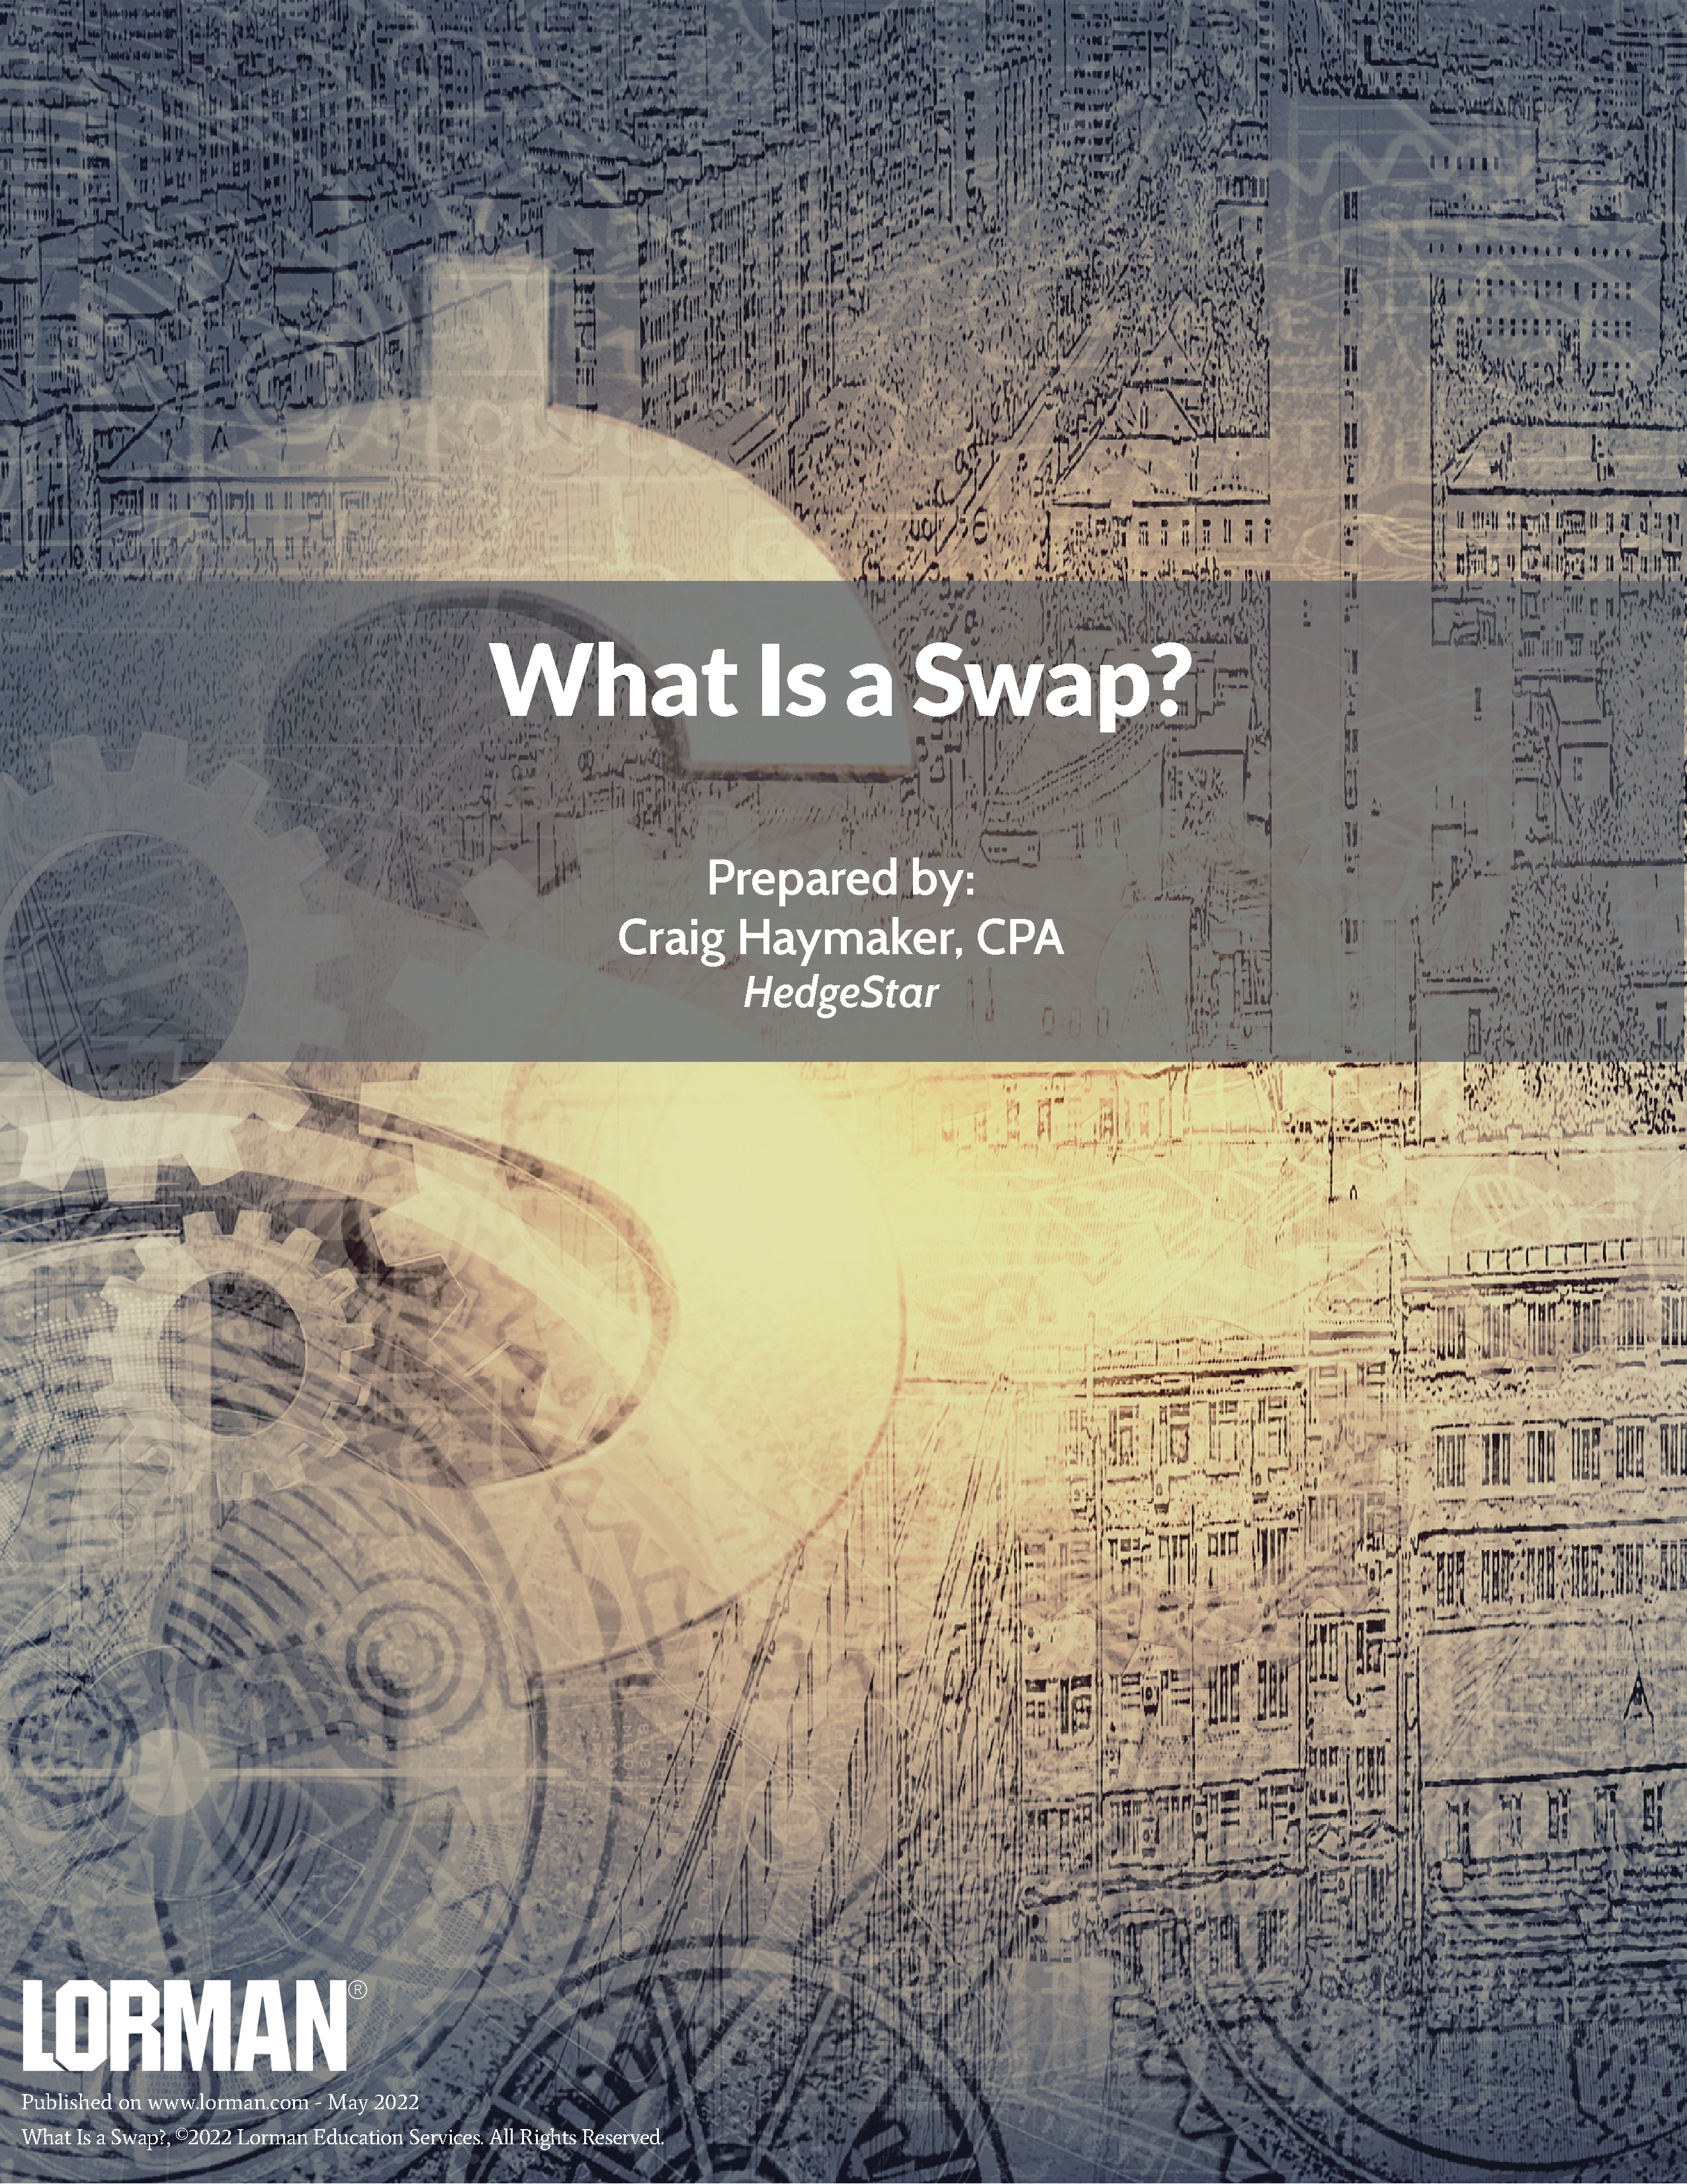 What Is a Swap?